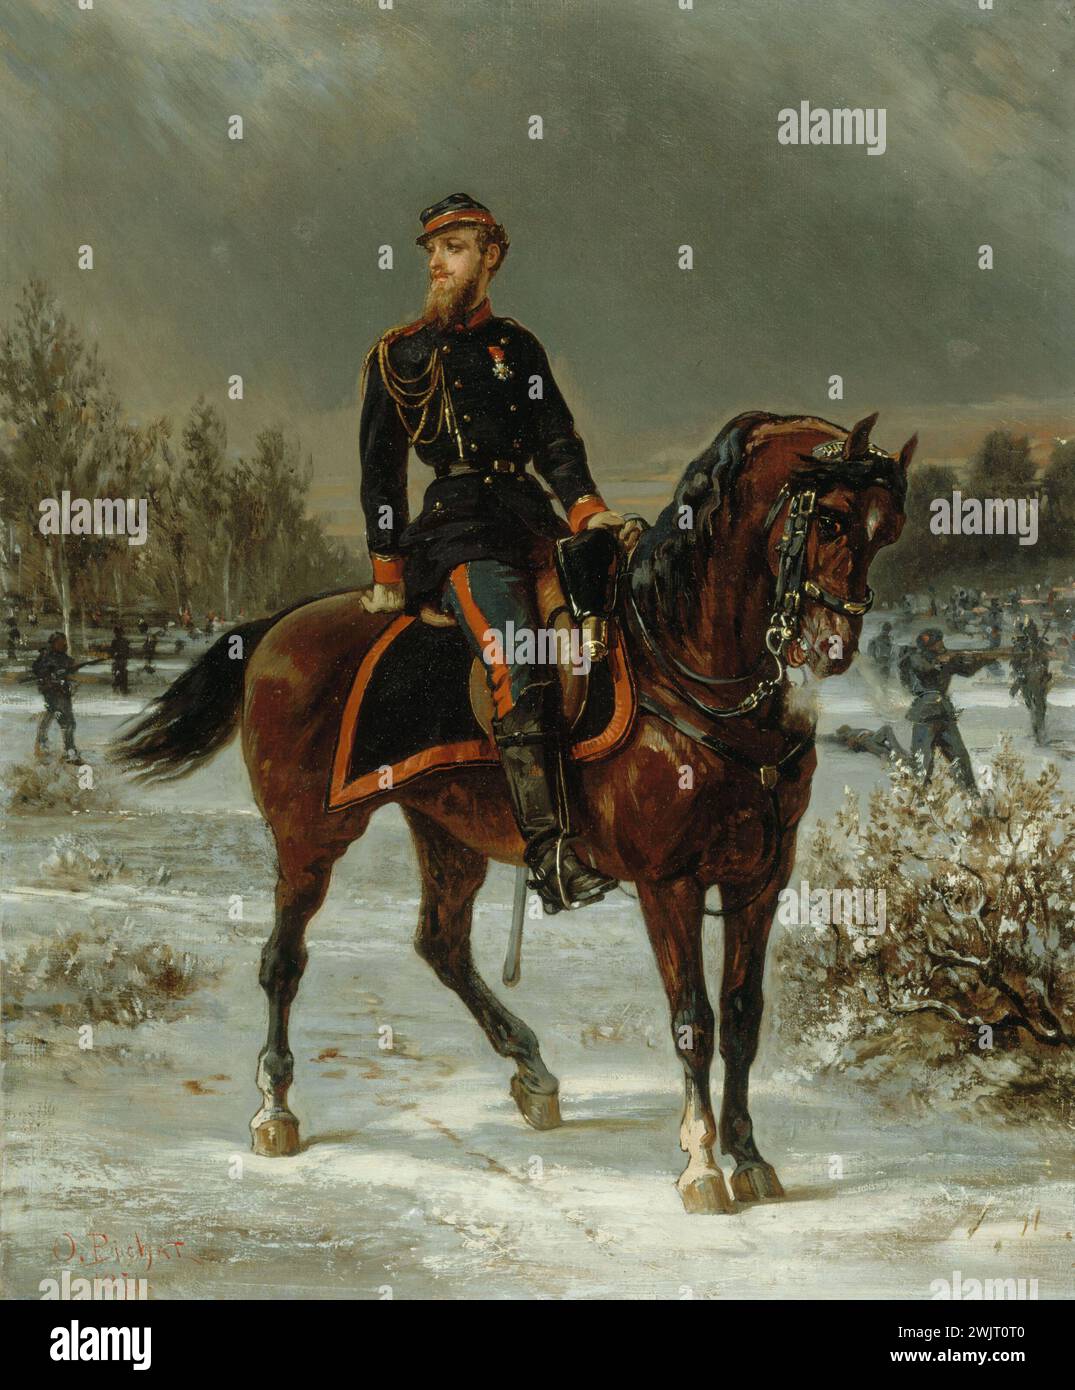 Olivier Pichat (1825-1912). 'Henry Houssaye (1848-1911), historian and criticism, in uniform of mobile officer', 1871. Oil on canvas. Paris, Carnavalet museum. 33374-2 On horseback, critic, writer, war of 1870-1871, French historian, military, uniform mobile officer, oil on canvas Stock Photo